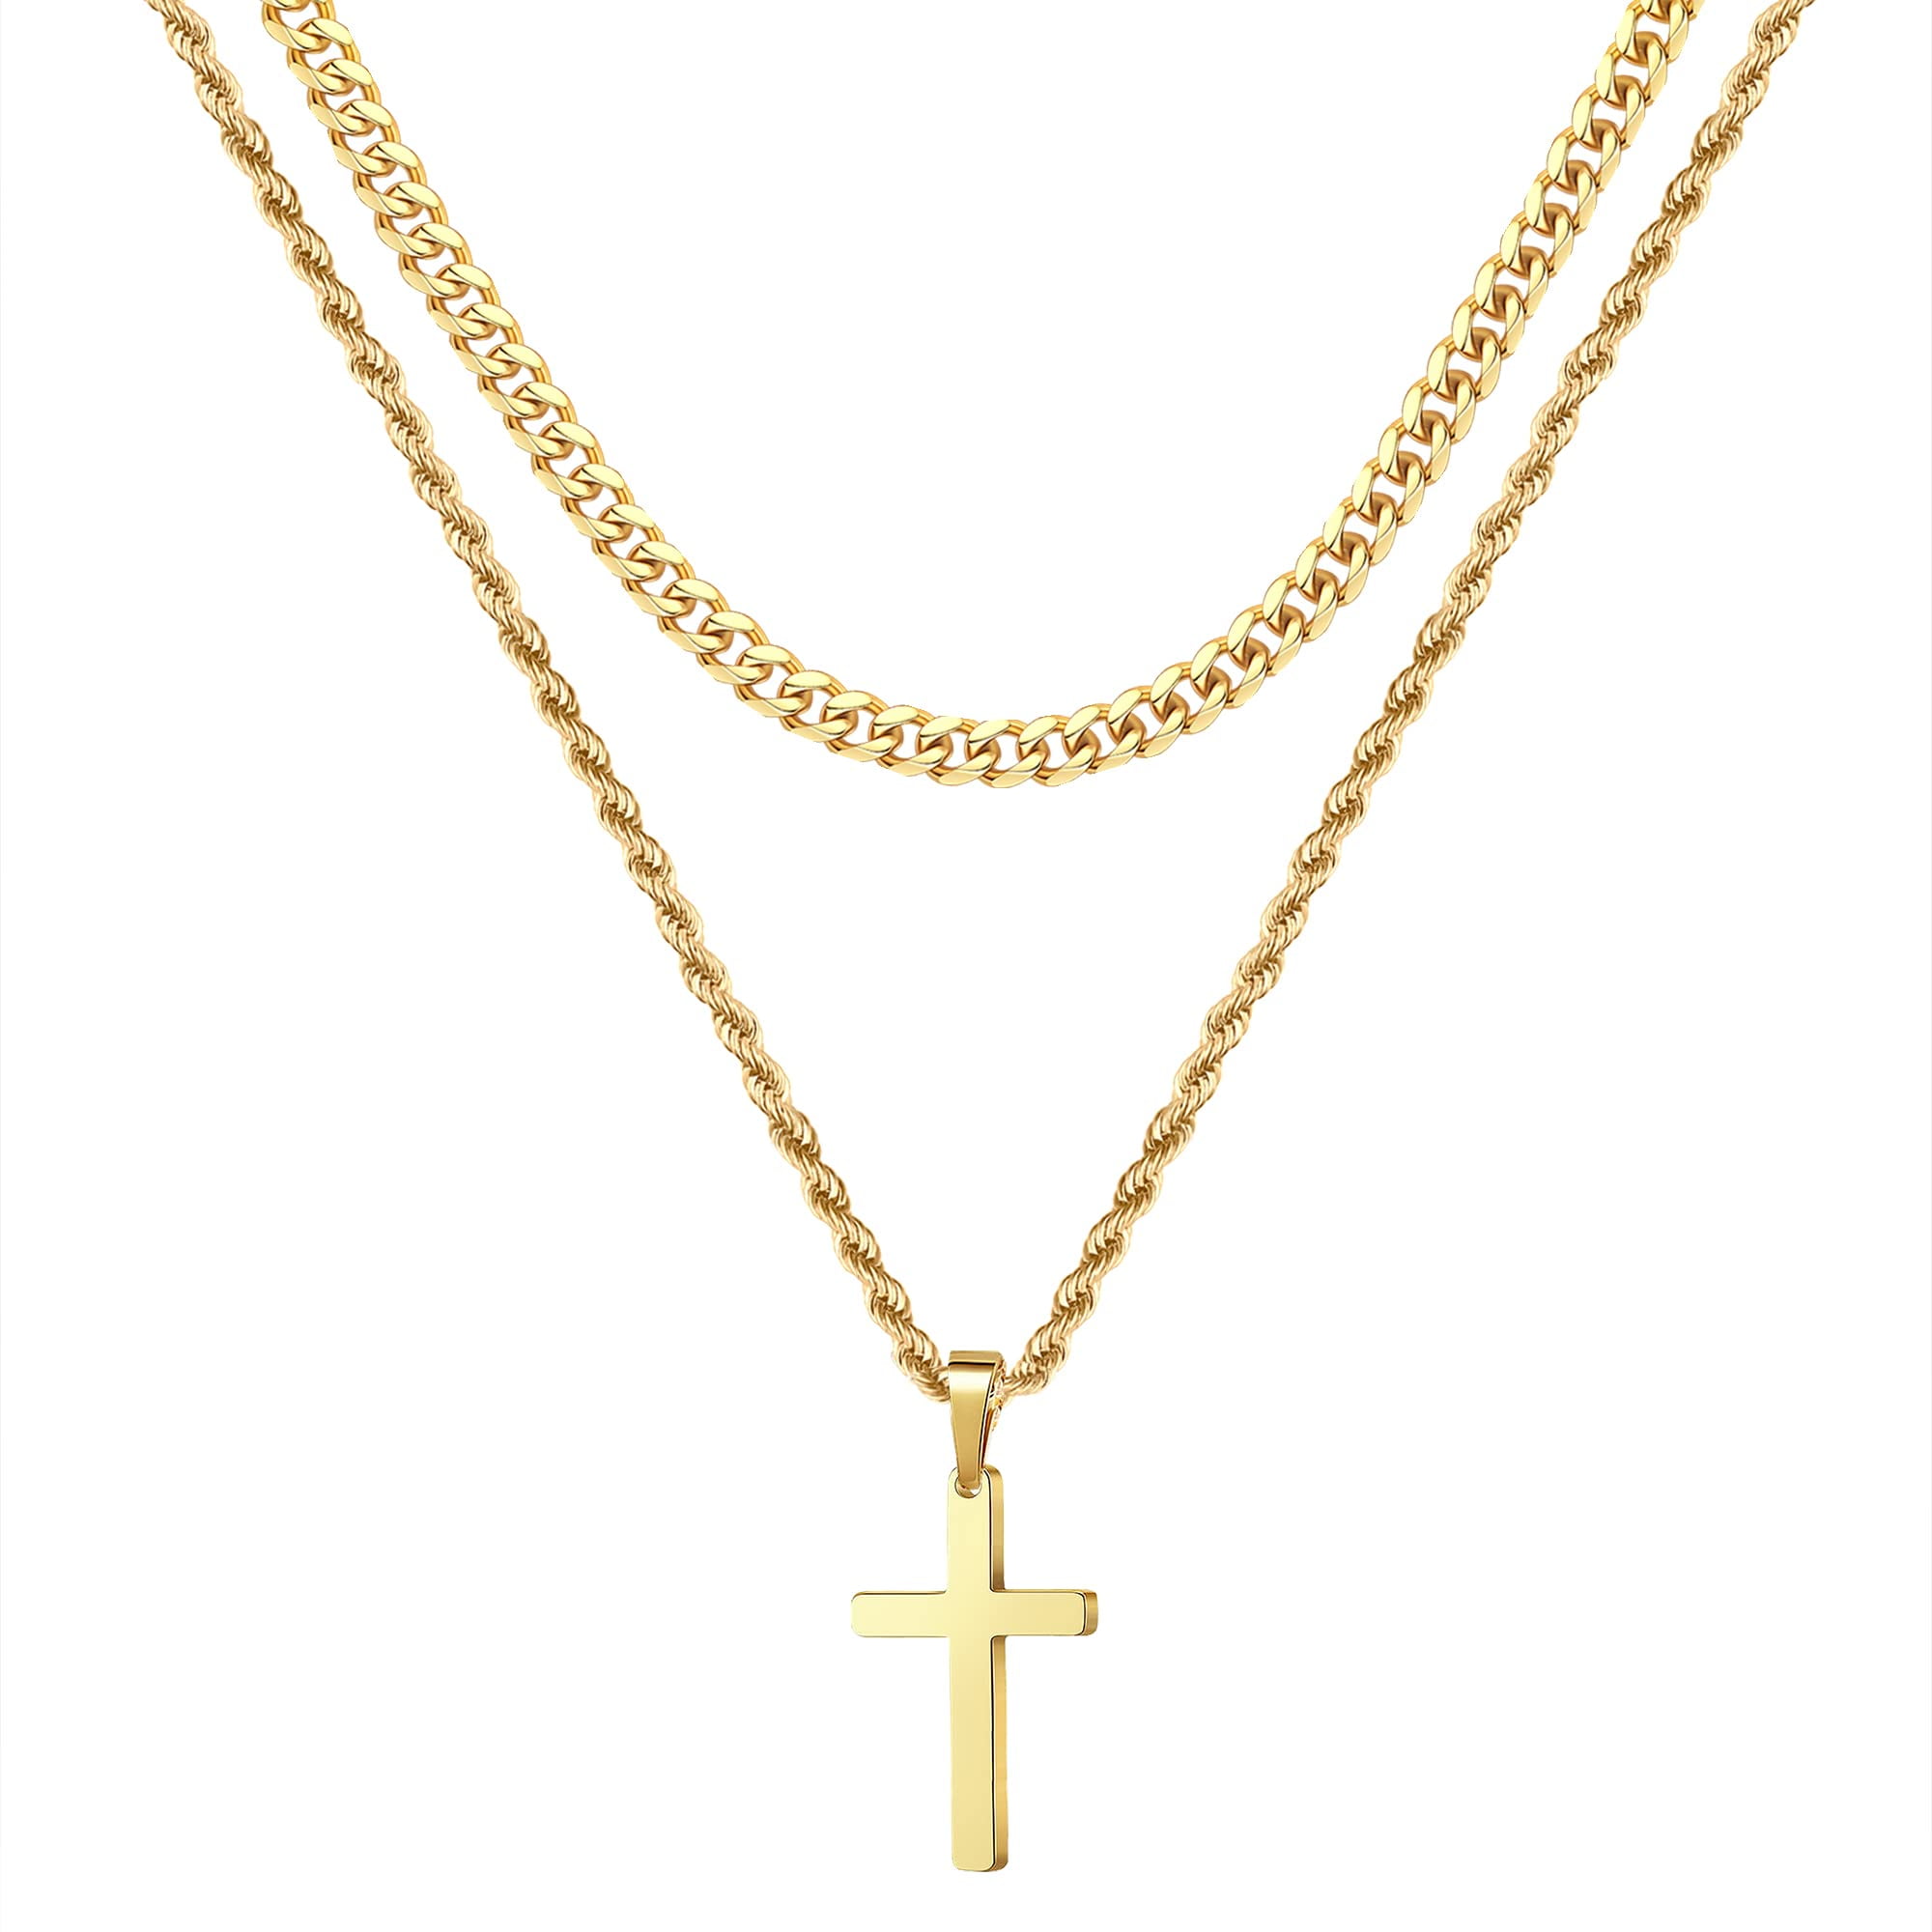 Mens Necklaces in Mens Jewelry | Gold - Walmart.com